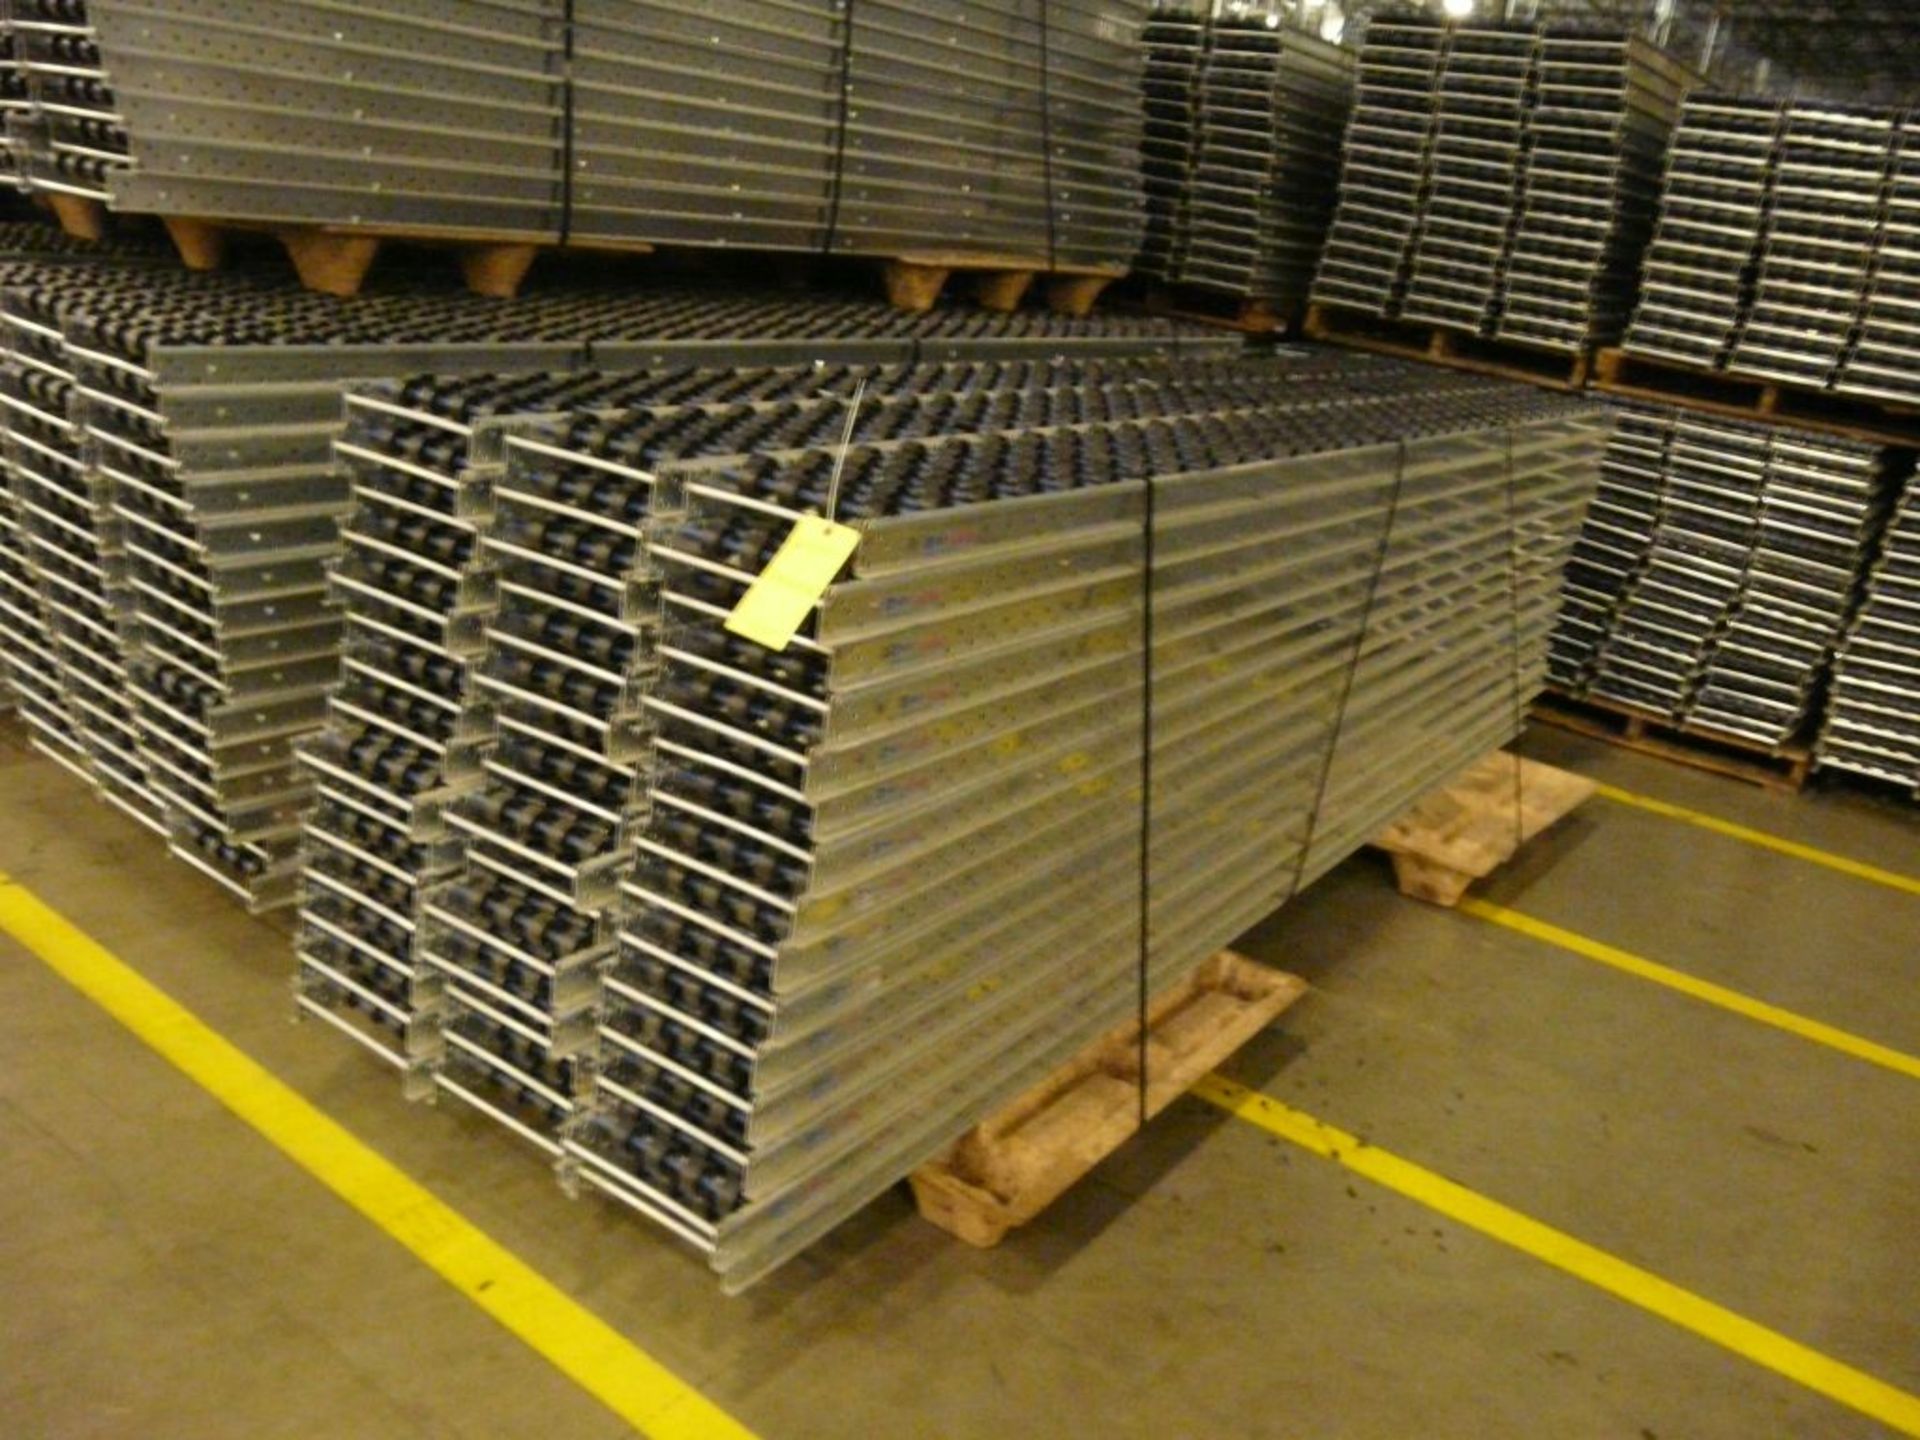 Lot of (90) SpanTrack Wheelbed Carton Flow Conveyors - 11.5'L x 11"W; Tag: 223602 - $30 Lot